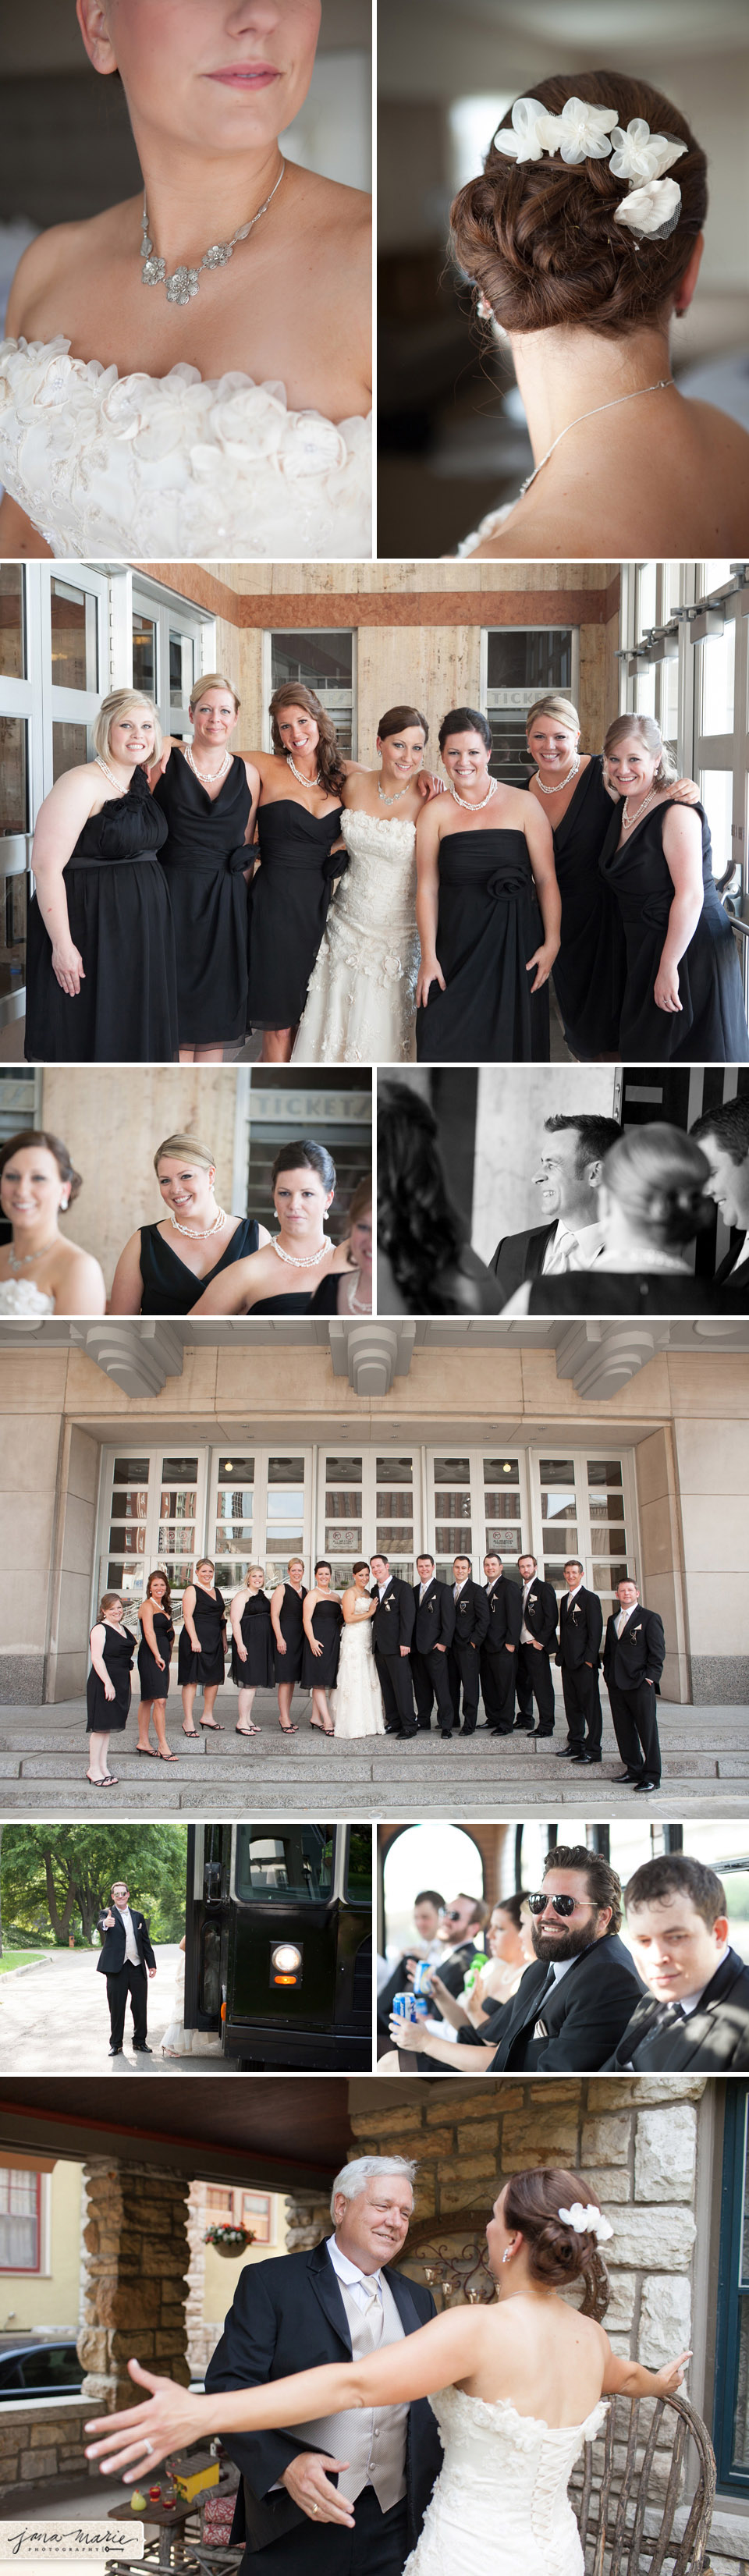 Friends, laughing, fun groups, outdoor photos, Bridal portraits, Jana Marie Photography, KC